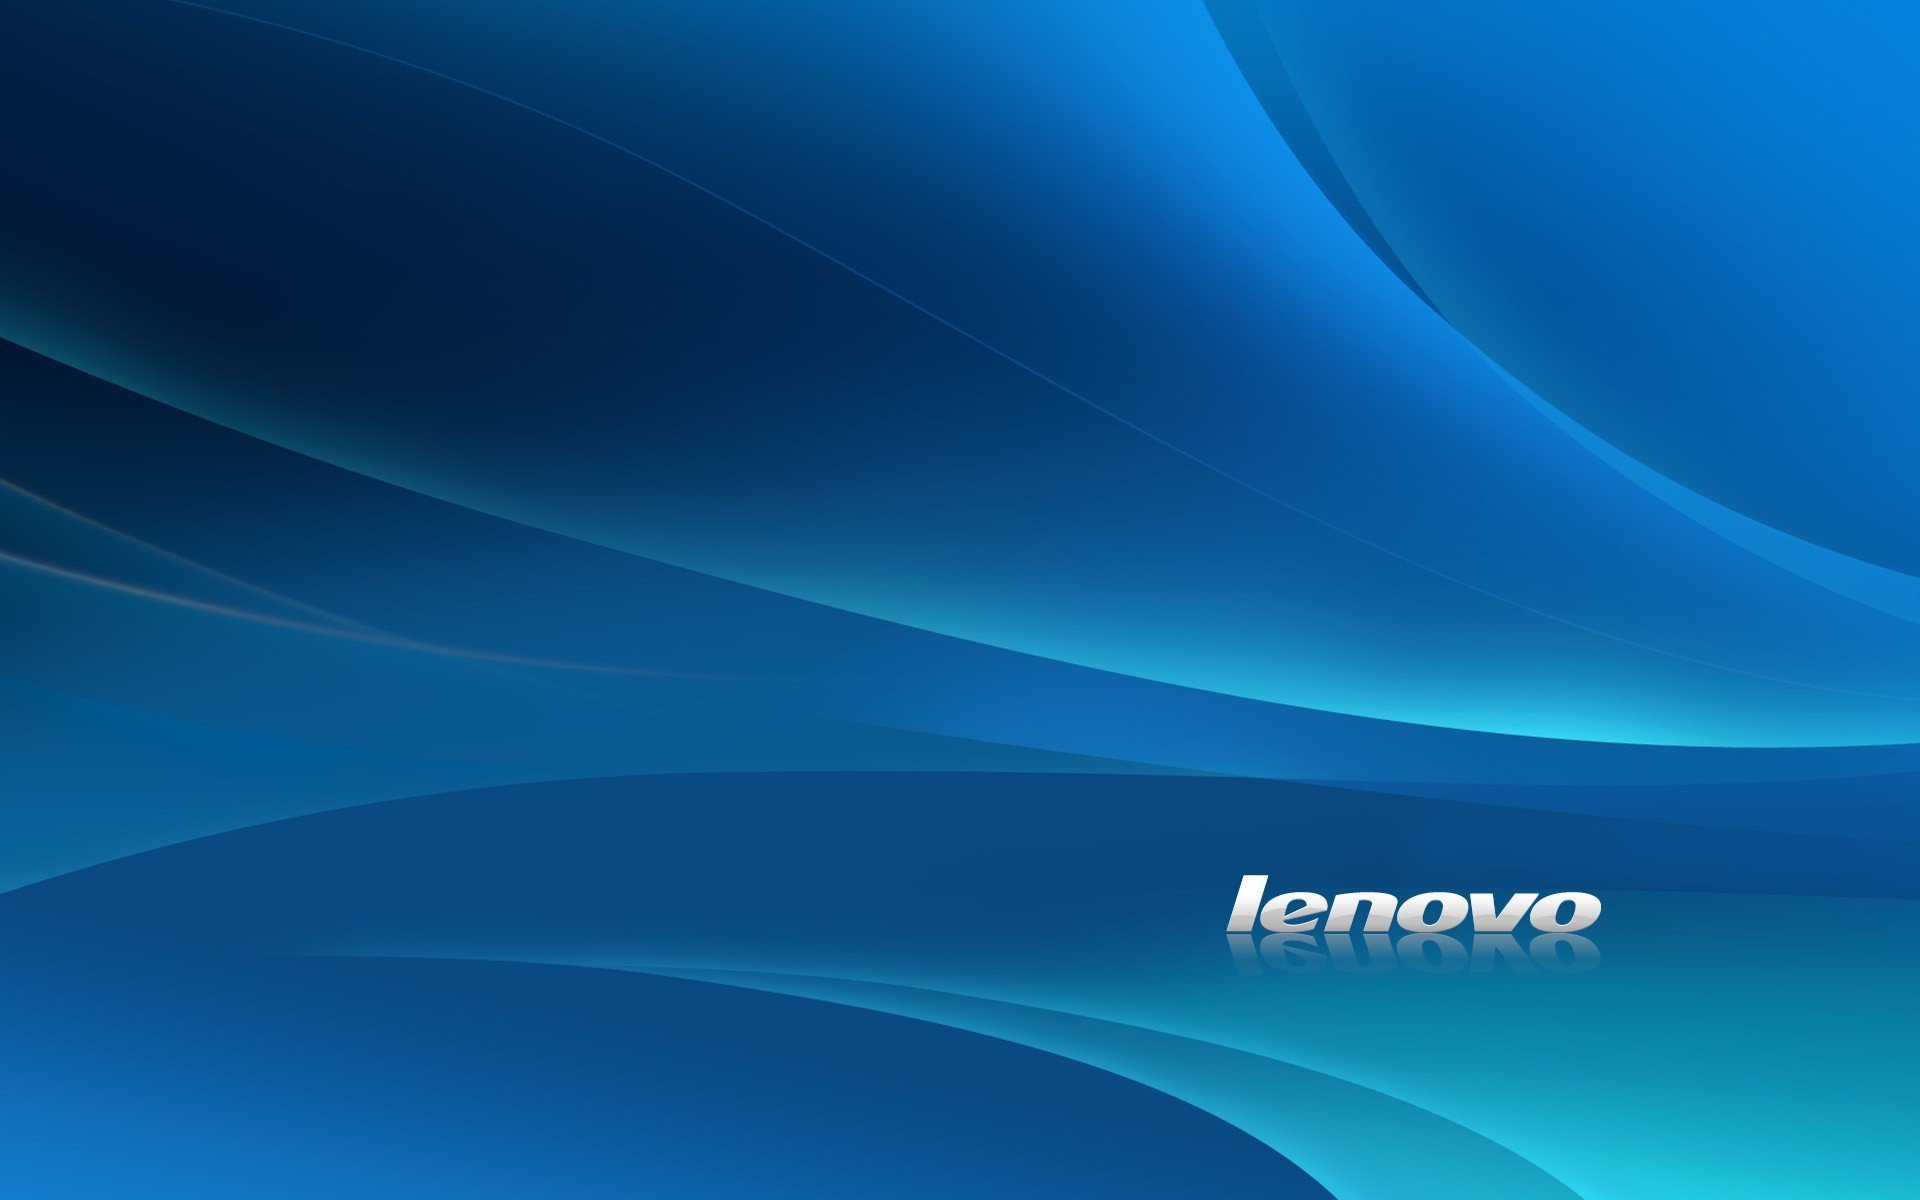  Lenovo  HD Wallpapers  Desktop and Mobile Images Photos